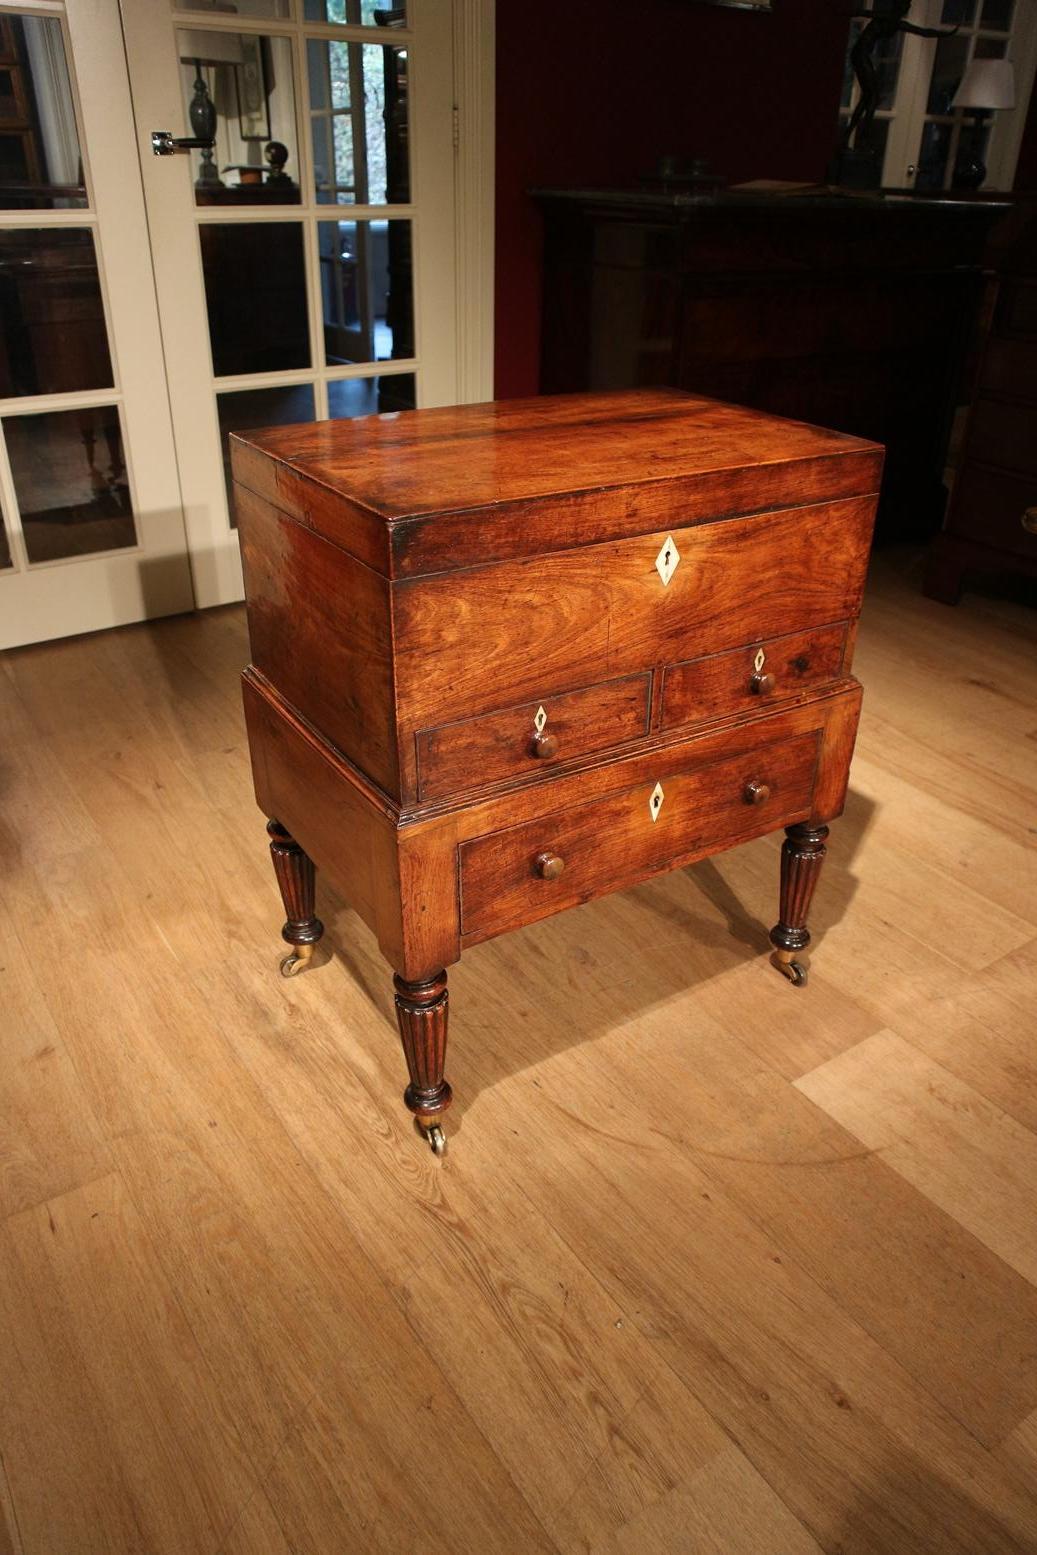 Special rosewood box with beautiful layout. Probably once made in commission as a sewing box. The furniture has 3 drawers where the 2 drawers next to each other have a secret closure. There are also small drawers at the bottom of the box. Very